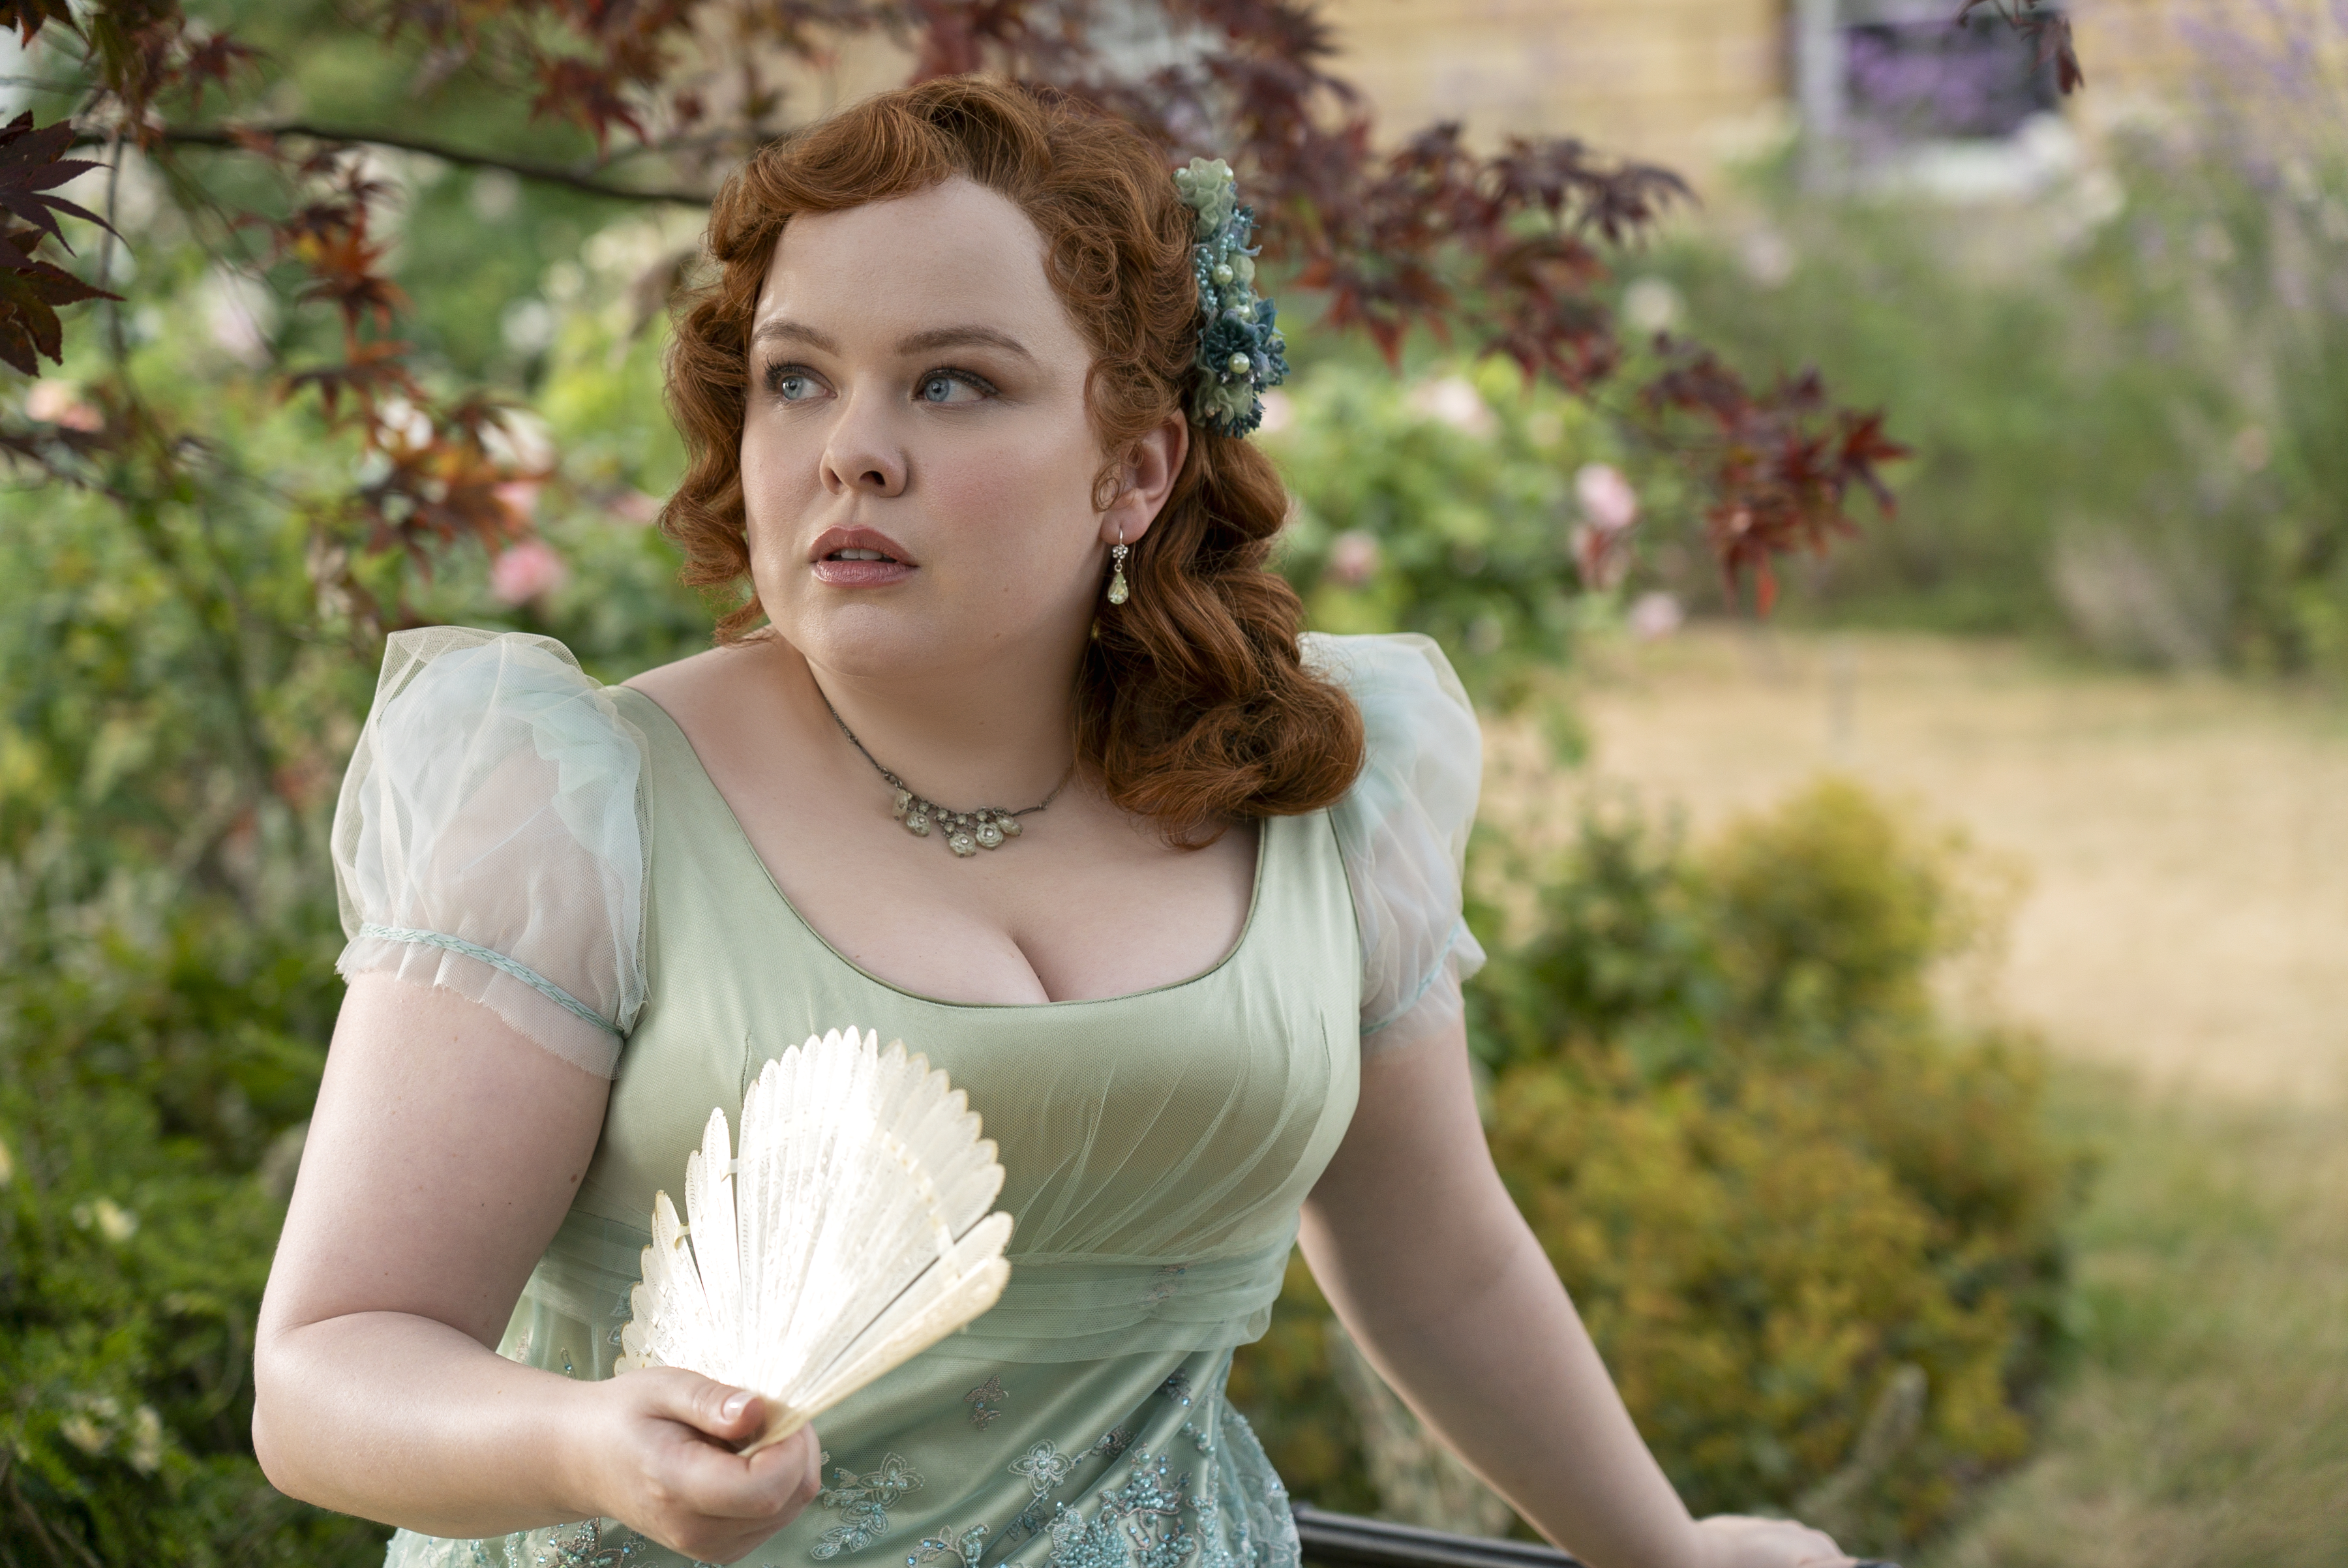 <p>Nicola Coughlan plays Penelope Featherington in episode 1, season 3 of "Bridgerton," which debuts on Netflix on May 16, 2024. </p><p>When season 3 begins, Penelope is "sort of like, 'I can't do this anymore. I'm out with Eloise. I'm out with Colin. I don't want to be with my family. I need a husband,'" Nicola told People magazine. "So she's like a woman on a mission. She's ready to go, ready to launch herself out into the marriage market in a new way. She wants a whole new look, and she gets it."</p>